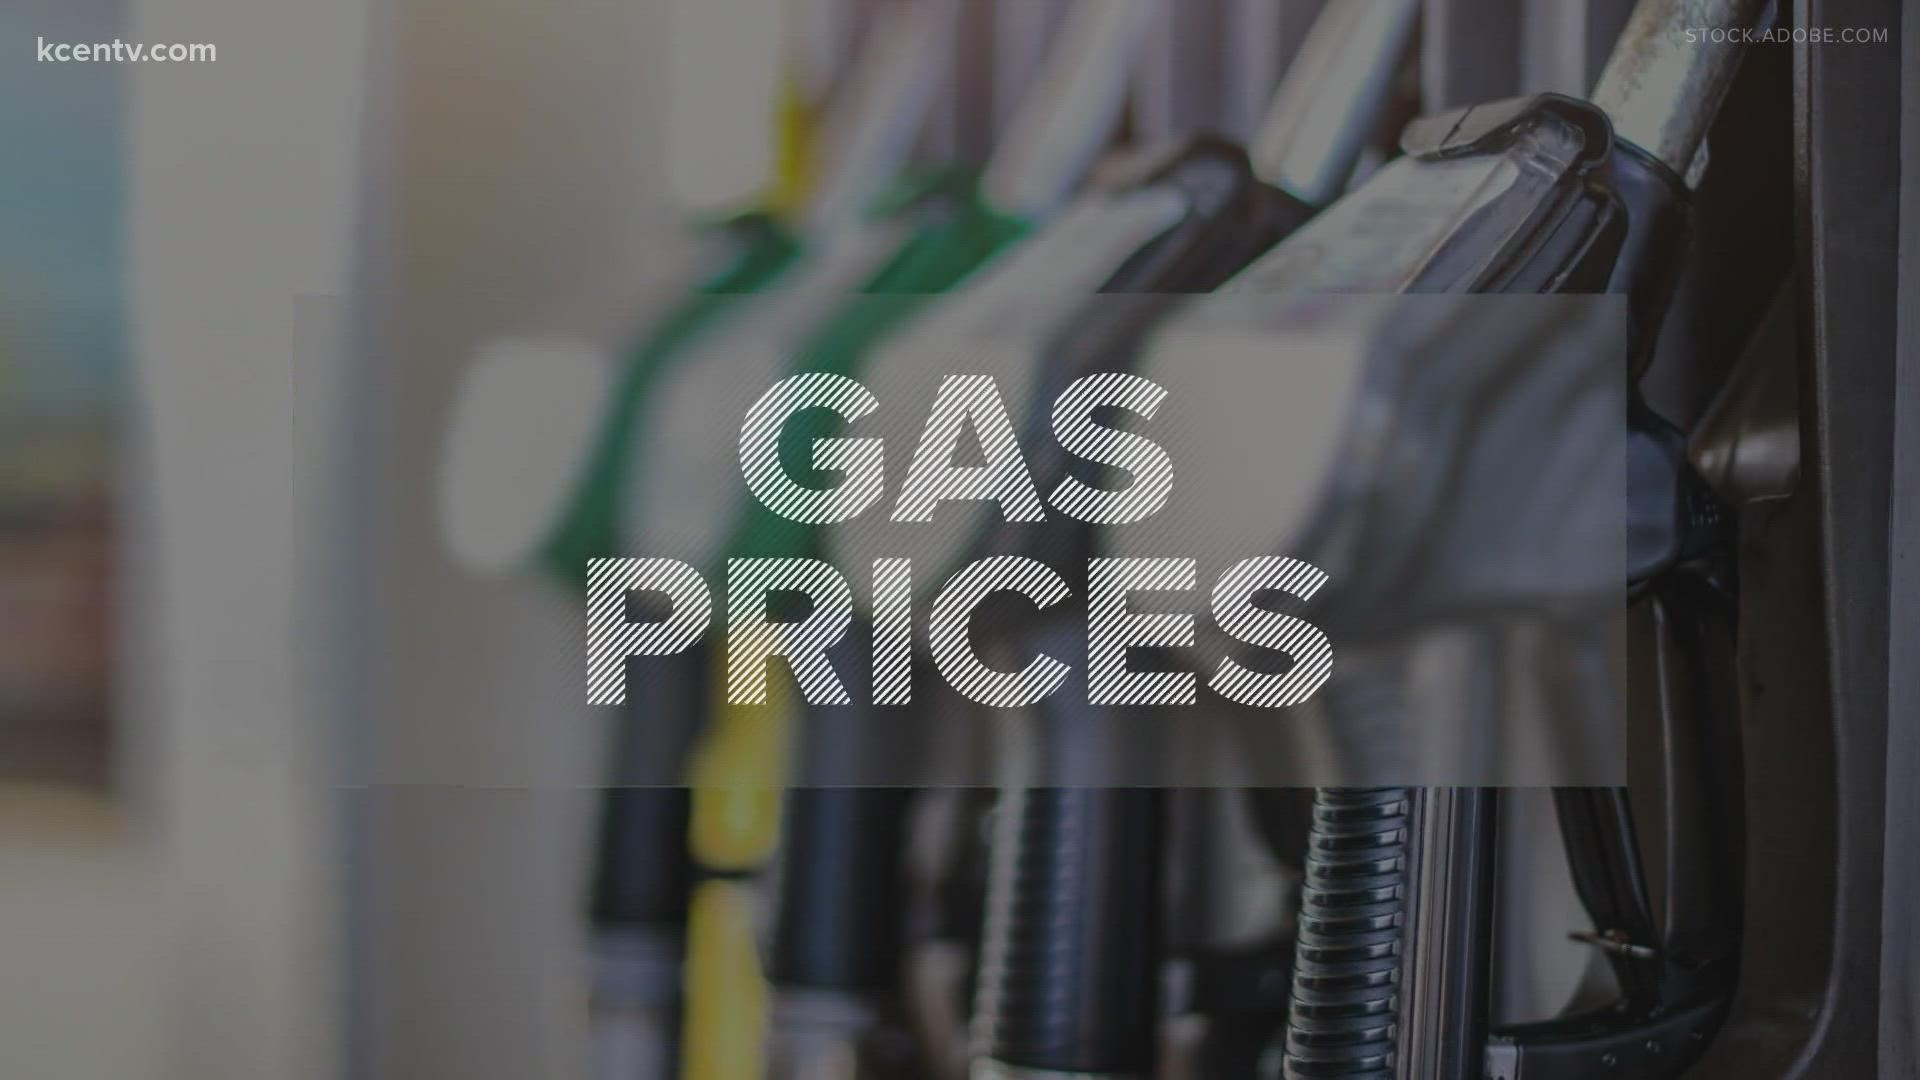 A surge in sales due to the start of summer vacation has caused gas prices to go up.